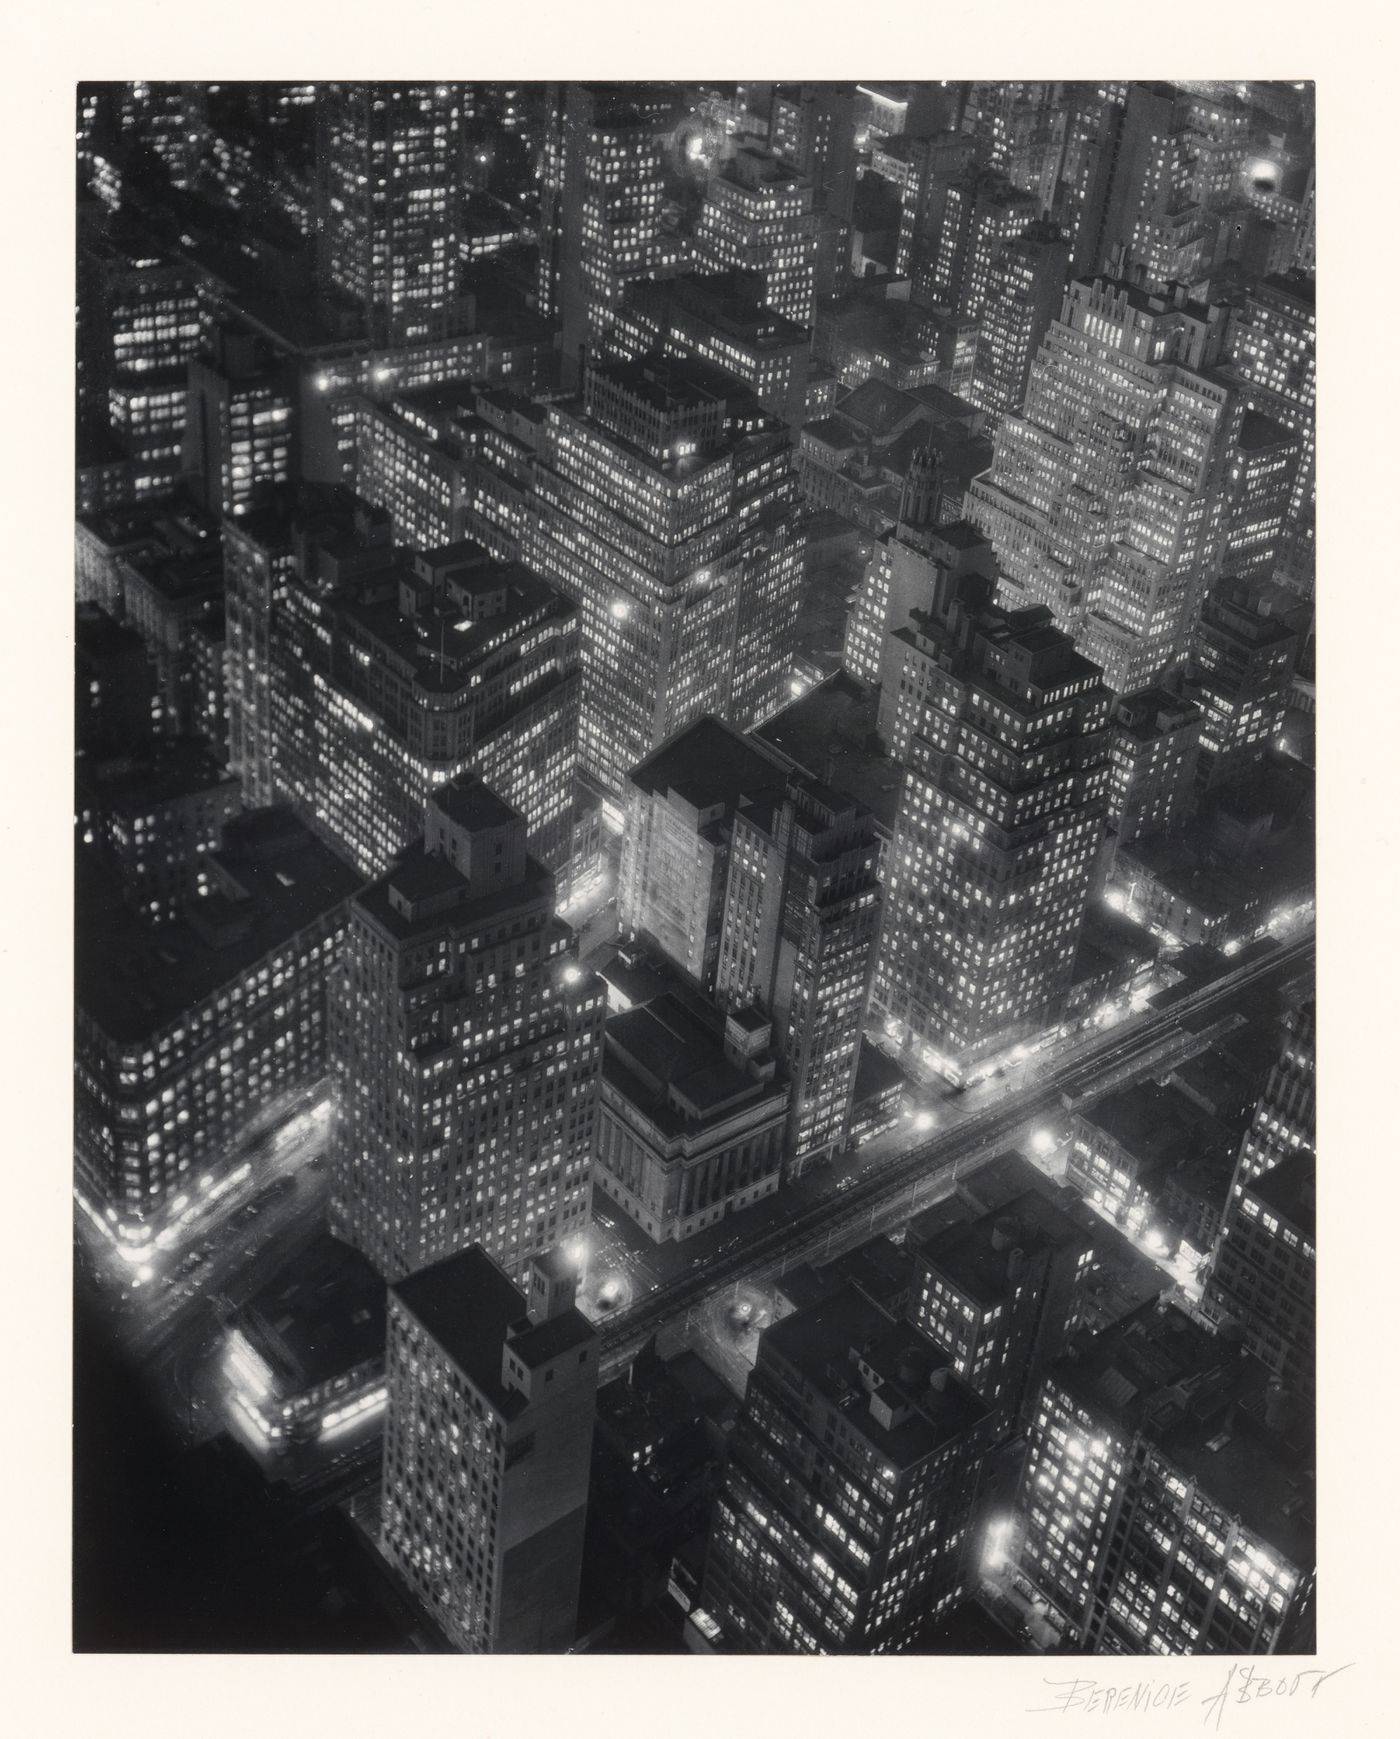 Night time overview of city, New York City, New York